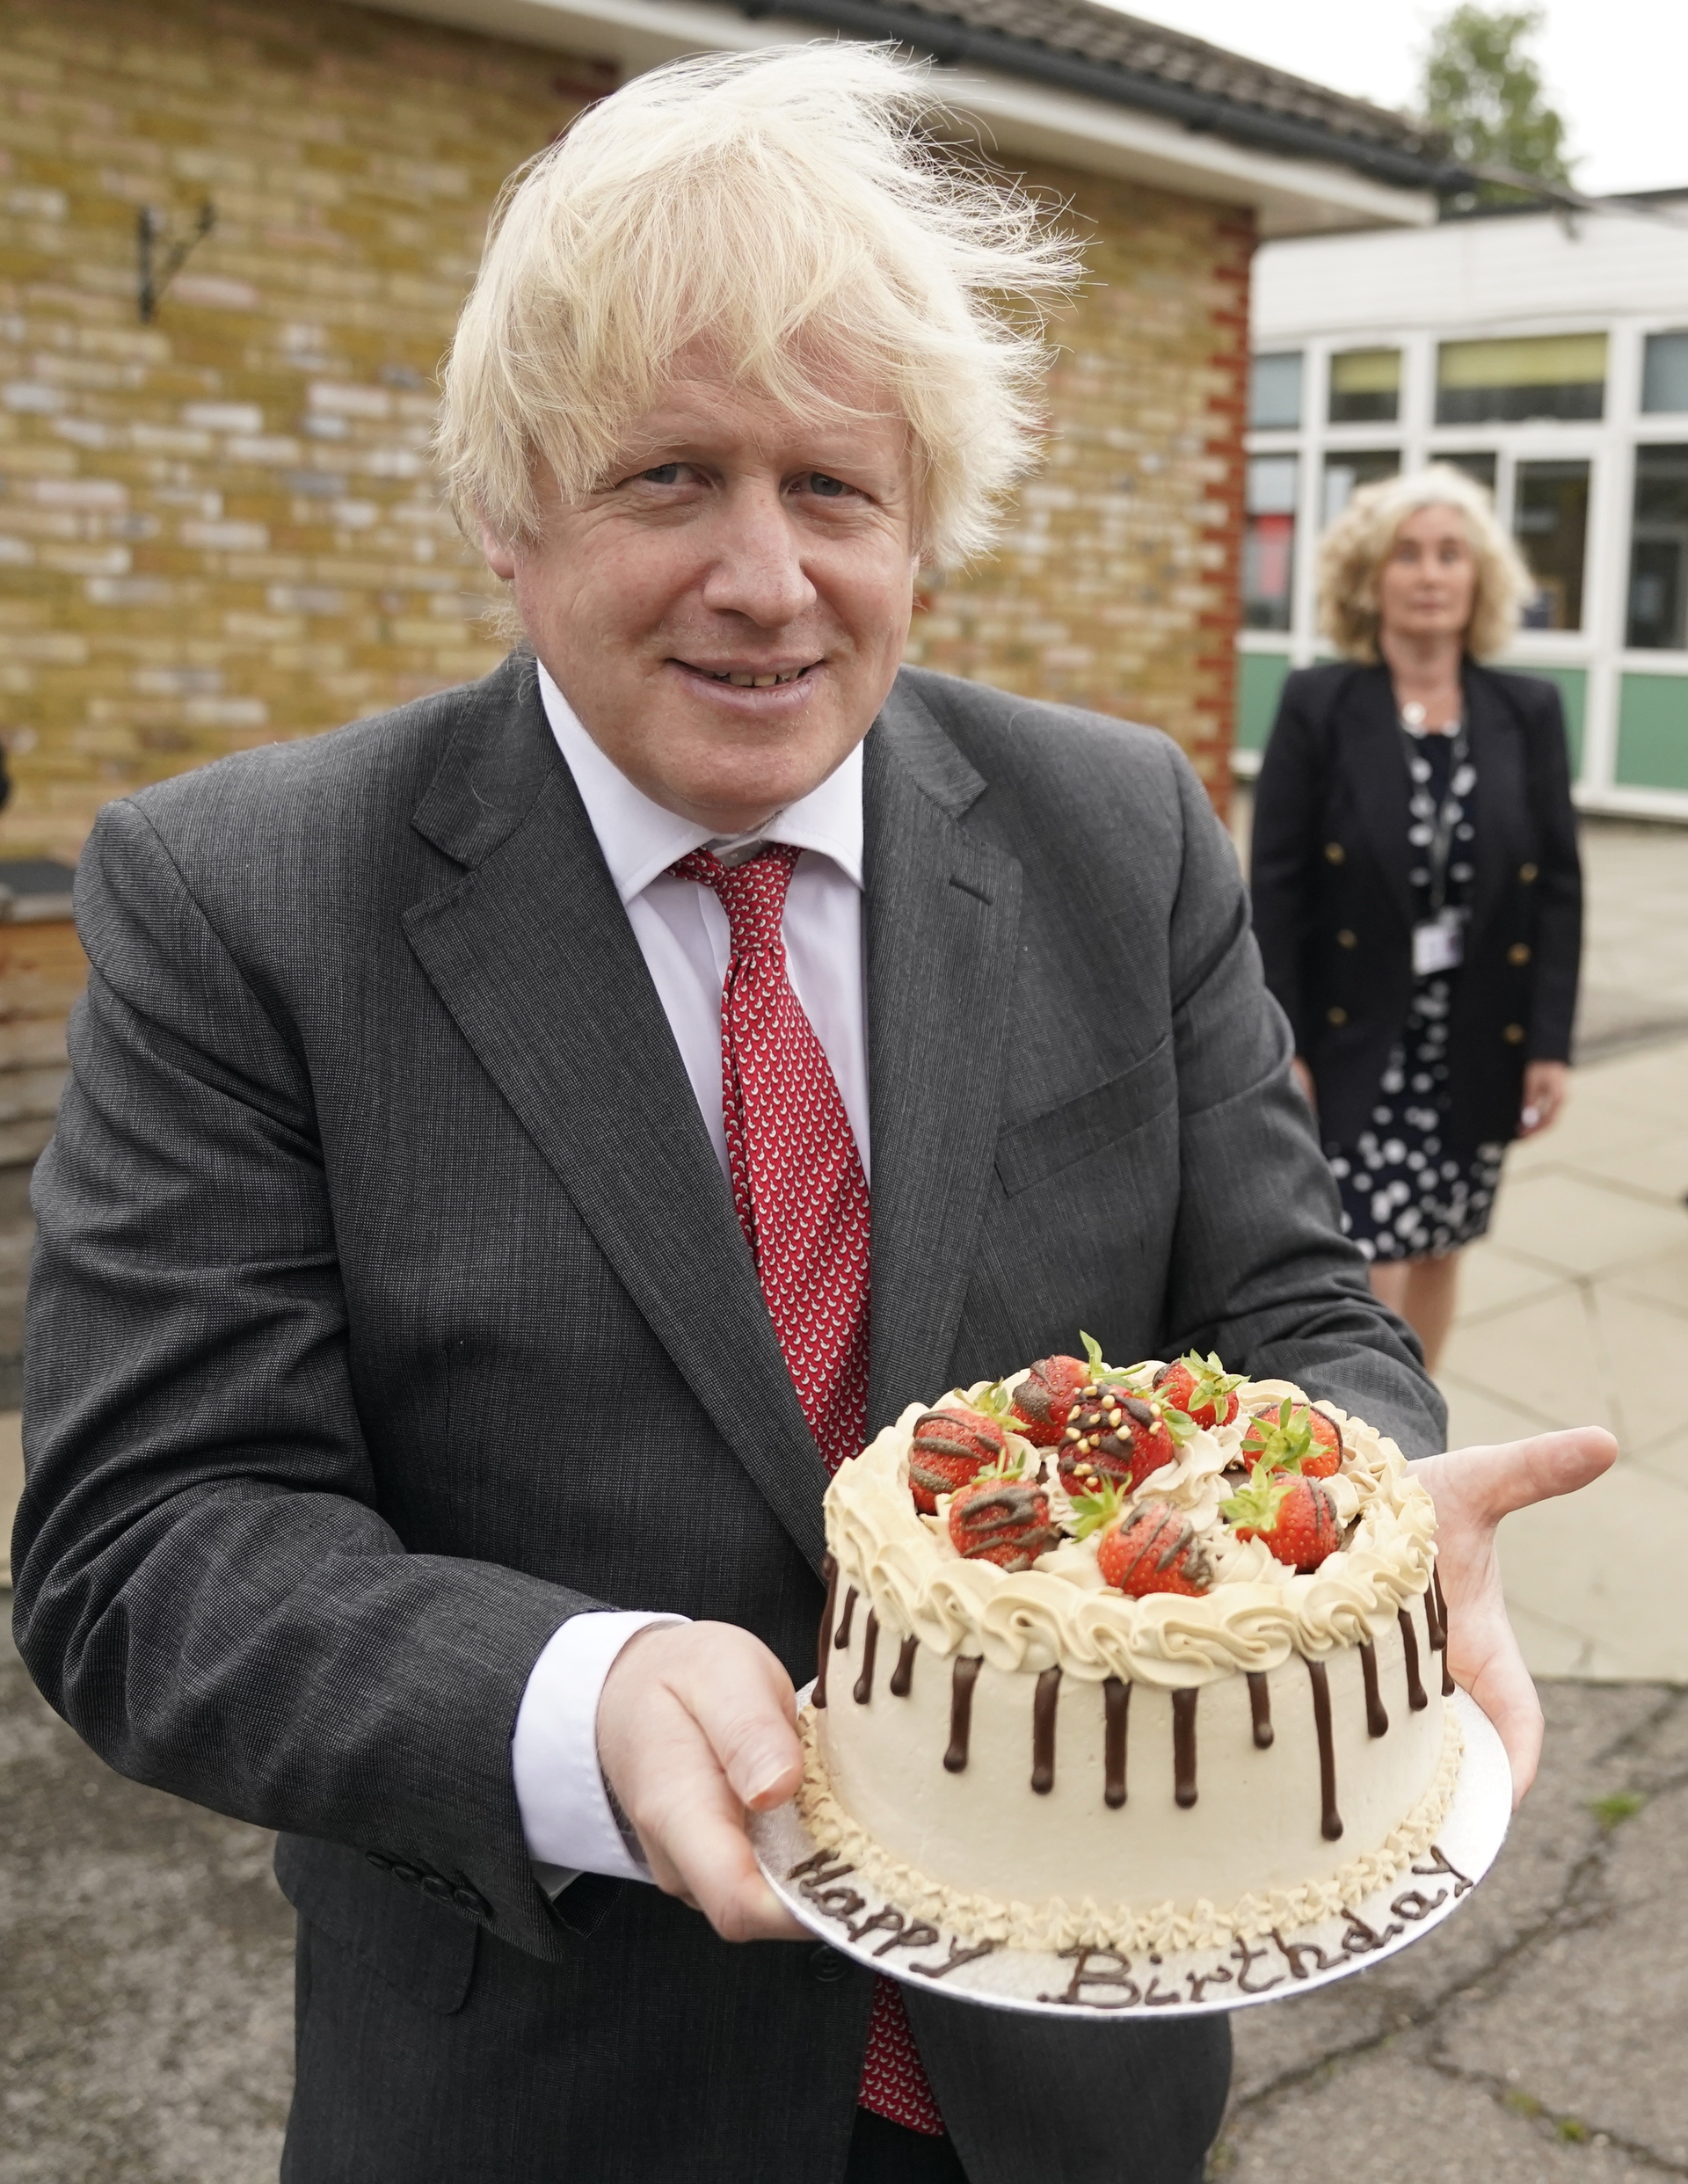 The Prime Minister Boris Johnson holds up his birthday cake as he visits Bovingdon Primary Academy, the cake was made by the staff at Bovingdon Primary Academy in Hemel Hempstead during Covid-19.